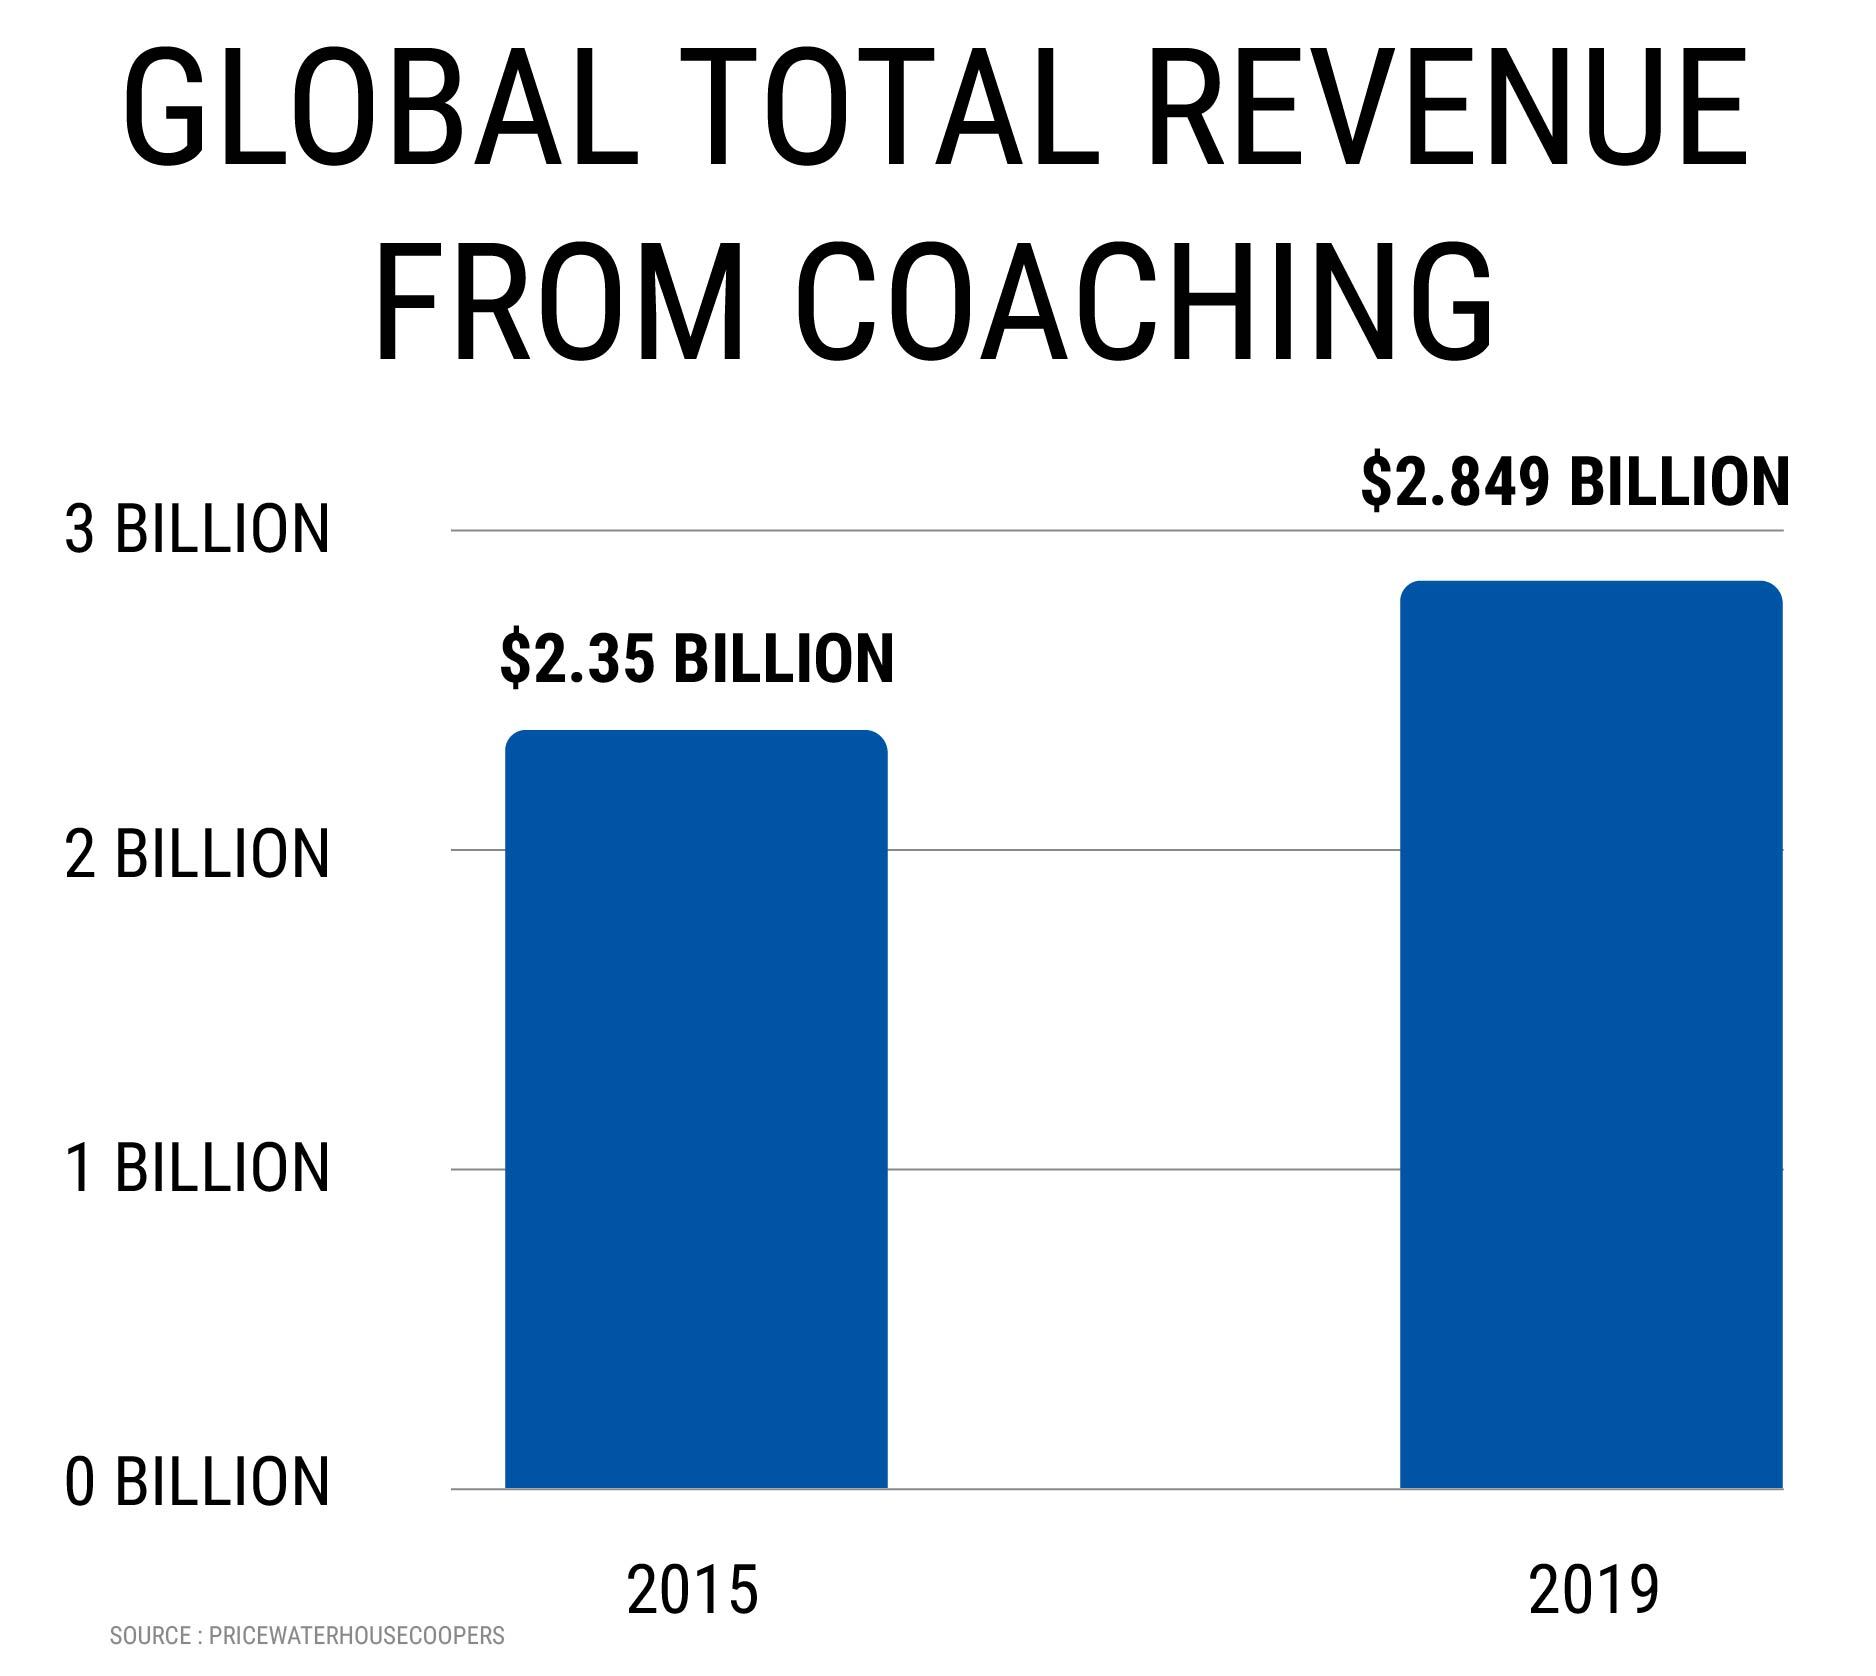 GLOBAL TOTAL REVENUE FROM COACHING